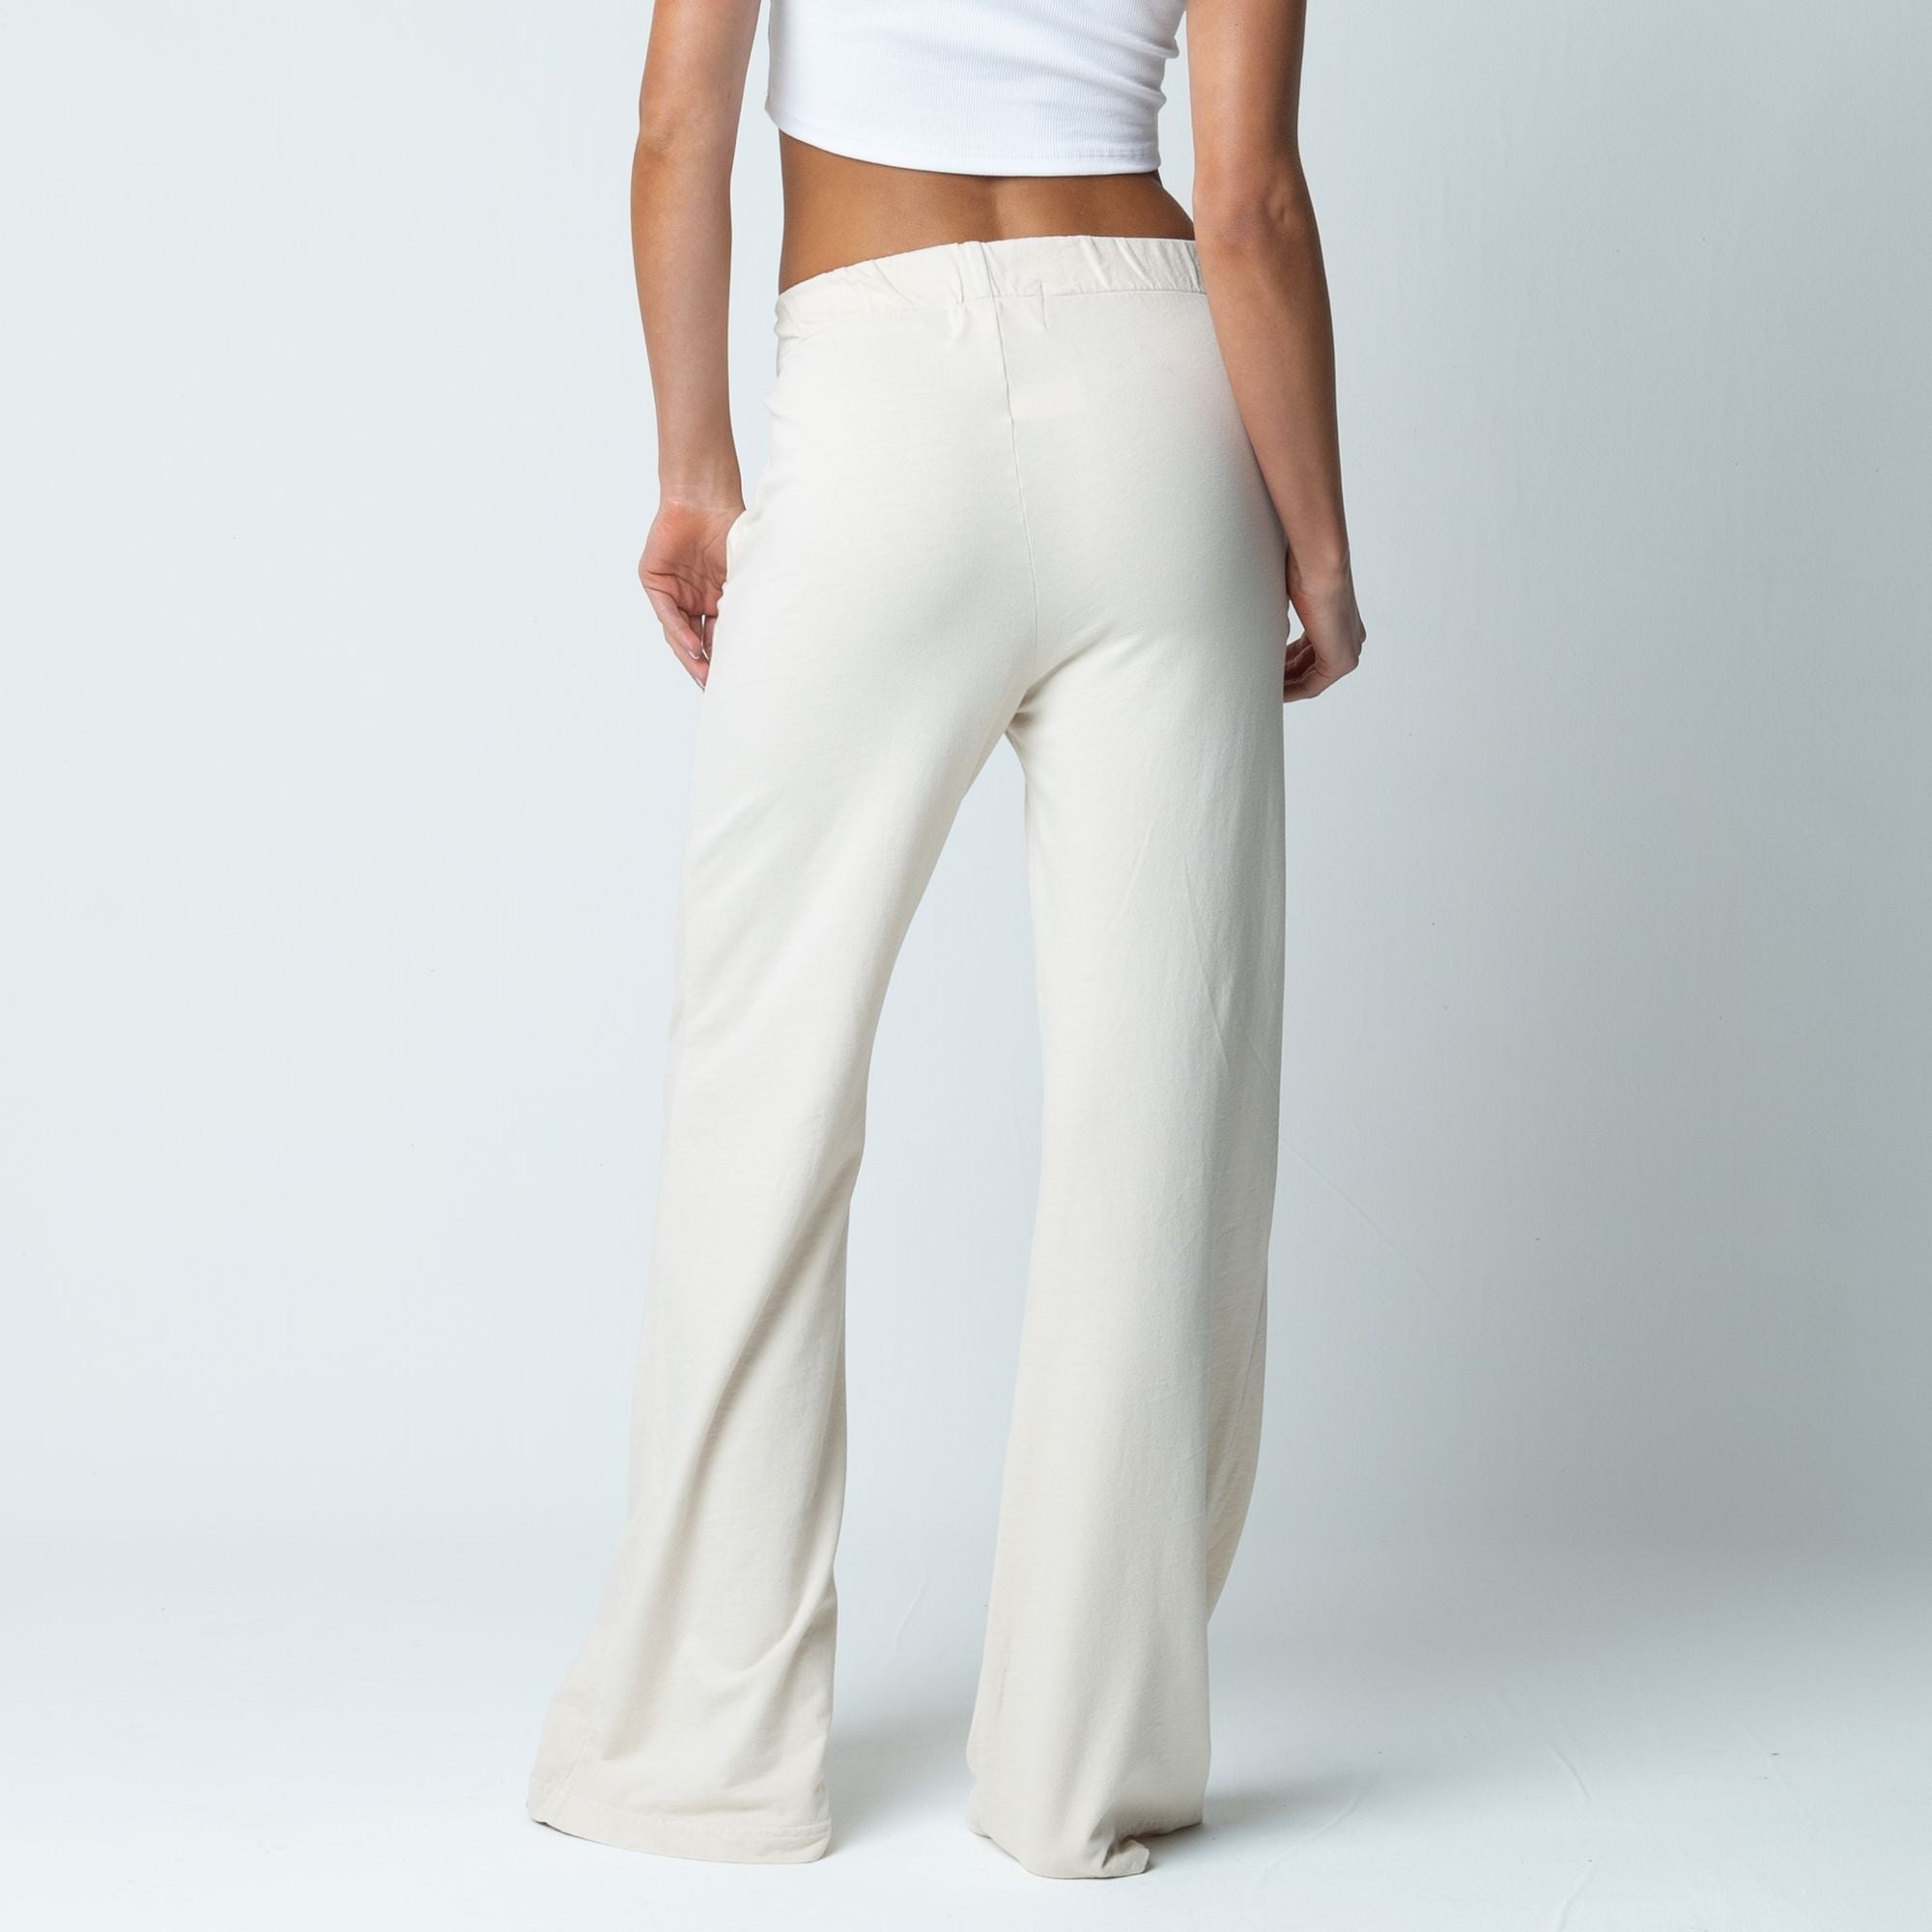 Lounge pants for women: A Guide to Finding the Perfect插图4